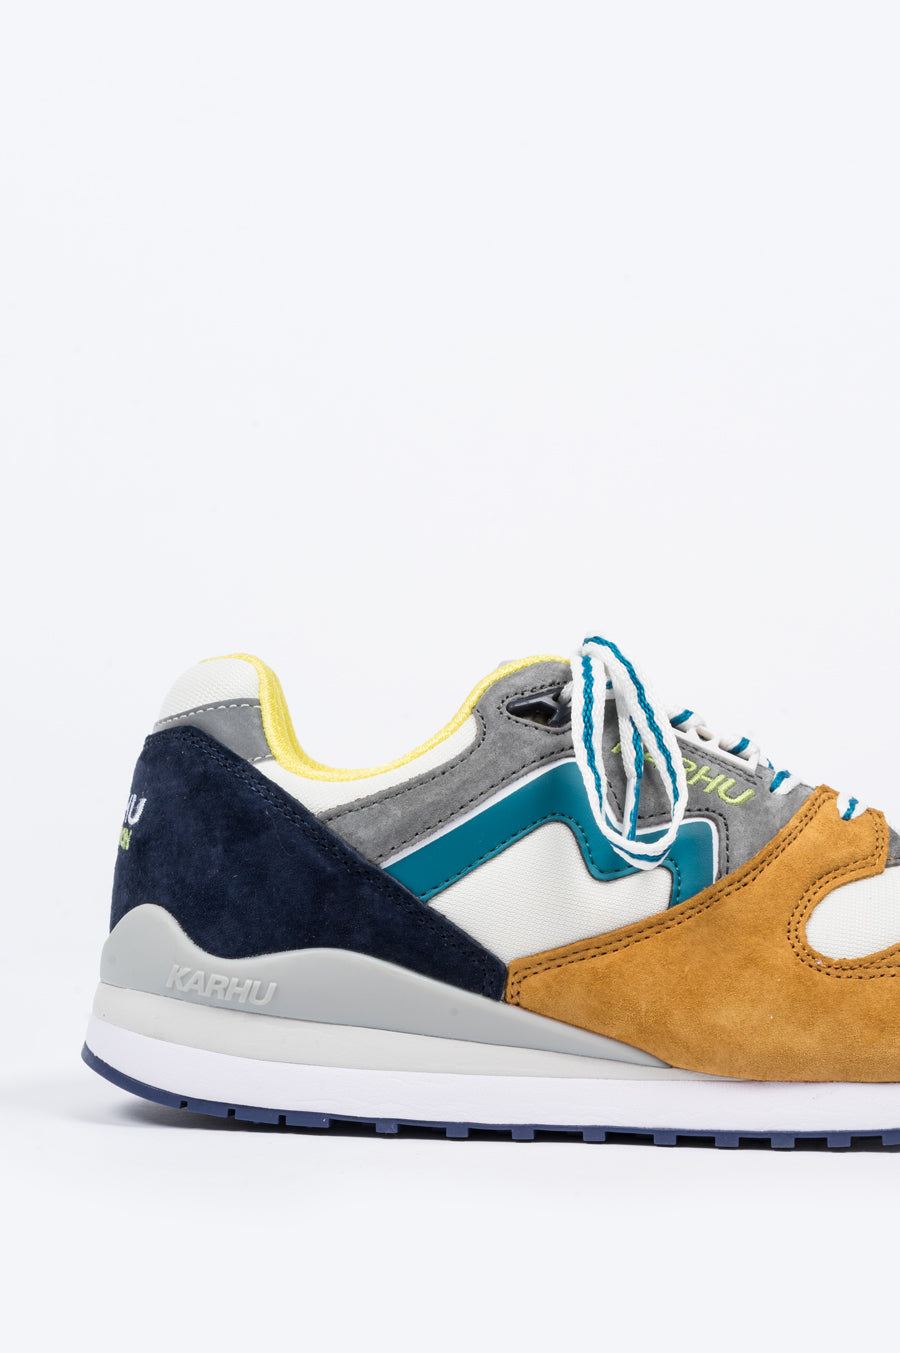 KARHU CATCH OF THE DAY SYNCHRON CLASSIC BUCKHORN BROWN - BLENDS